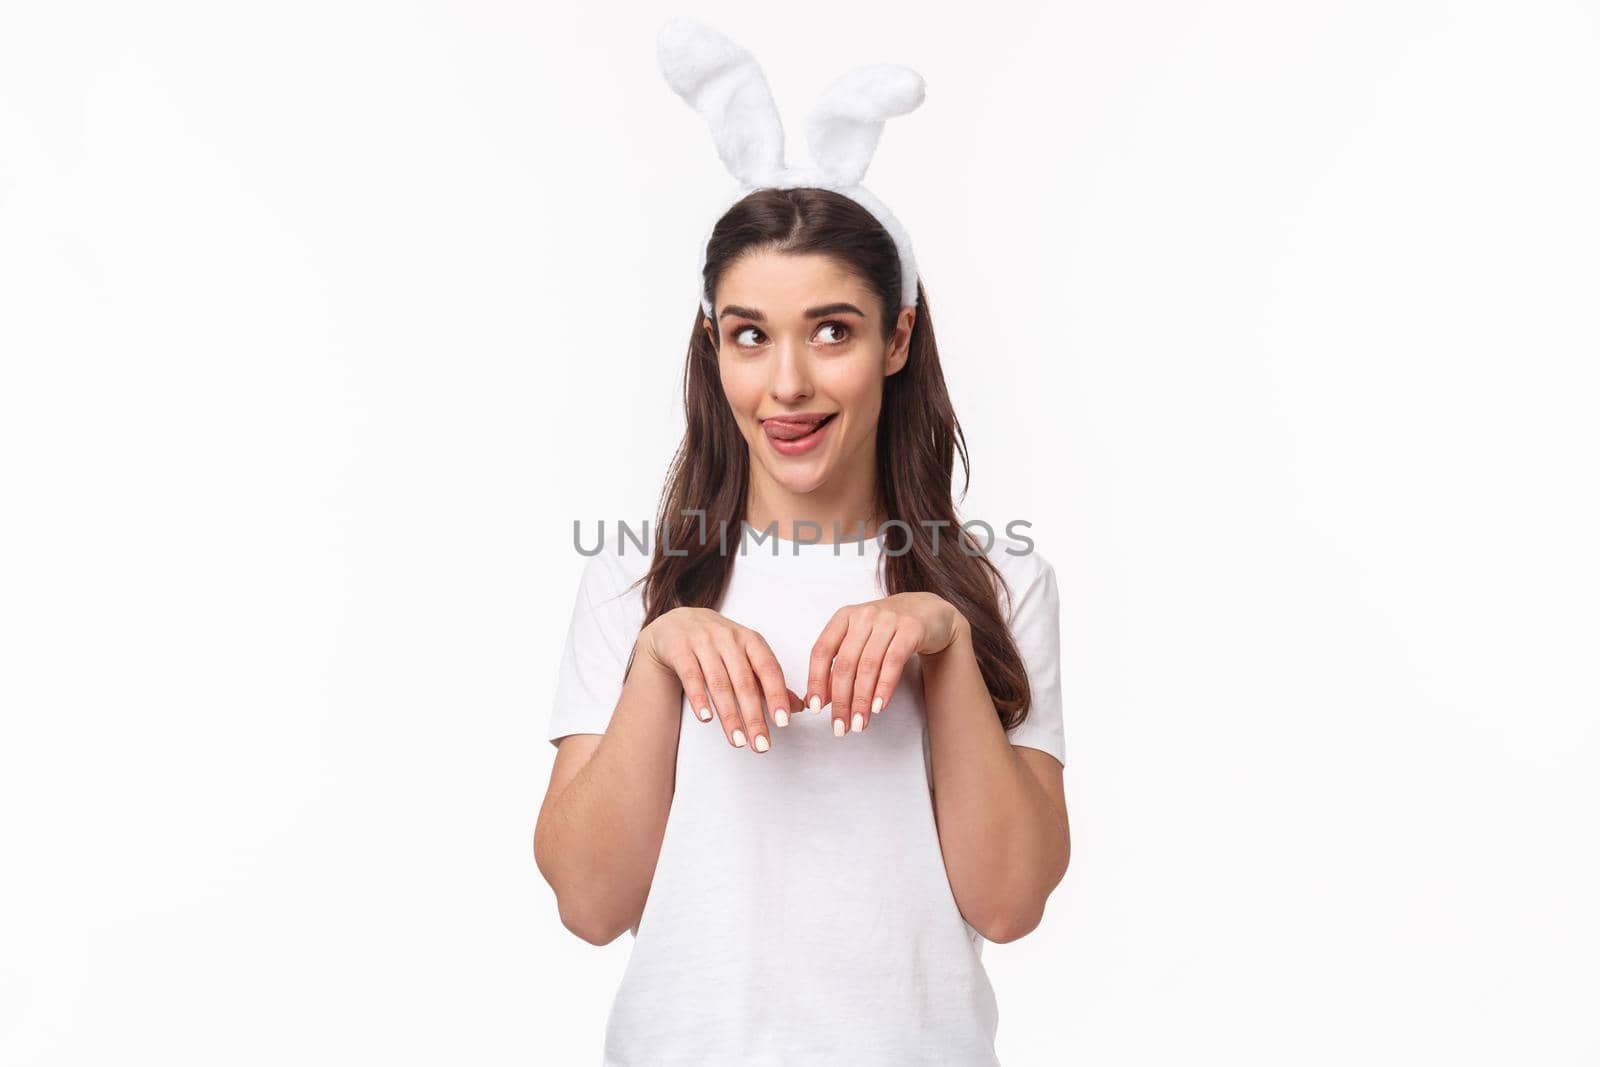 Funny and silly, playful girl in rabbit ears, t-shirt, looking away and licking lips, daydreaming about something delicious on Easter day, imitating bunny with hands pulled close to chest like paws.